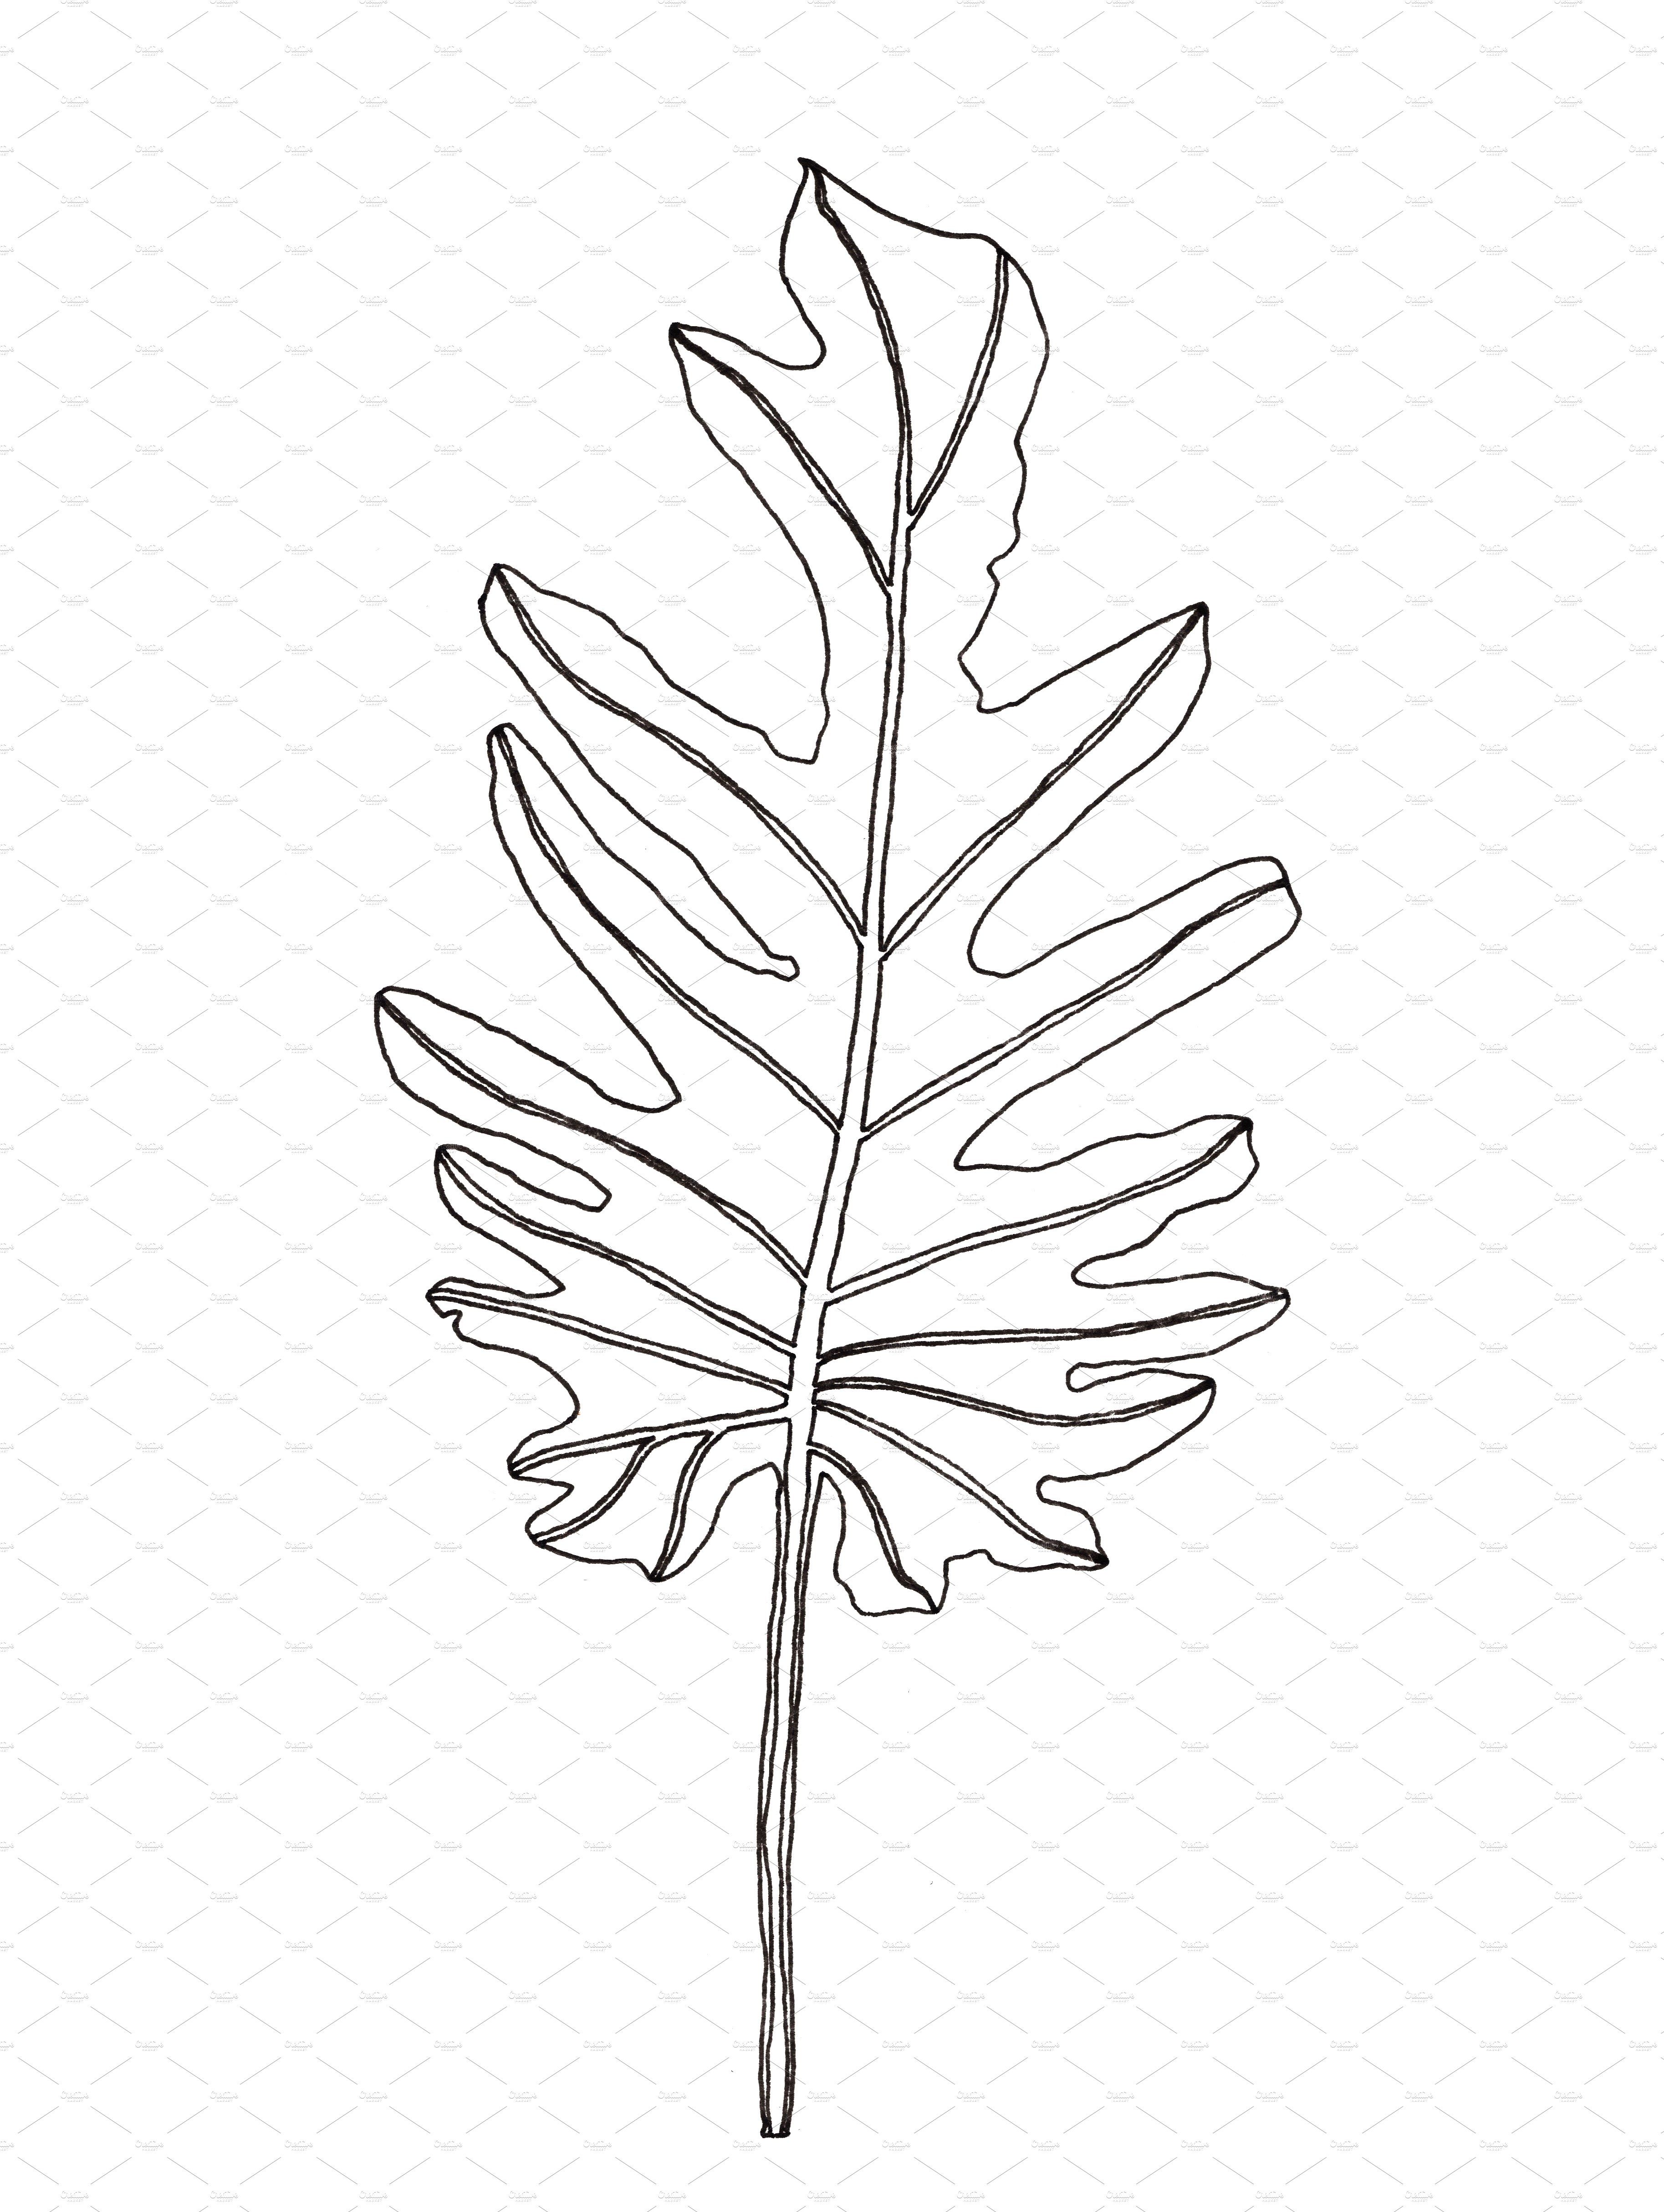 Palm leaves clipart, Foliage clipart